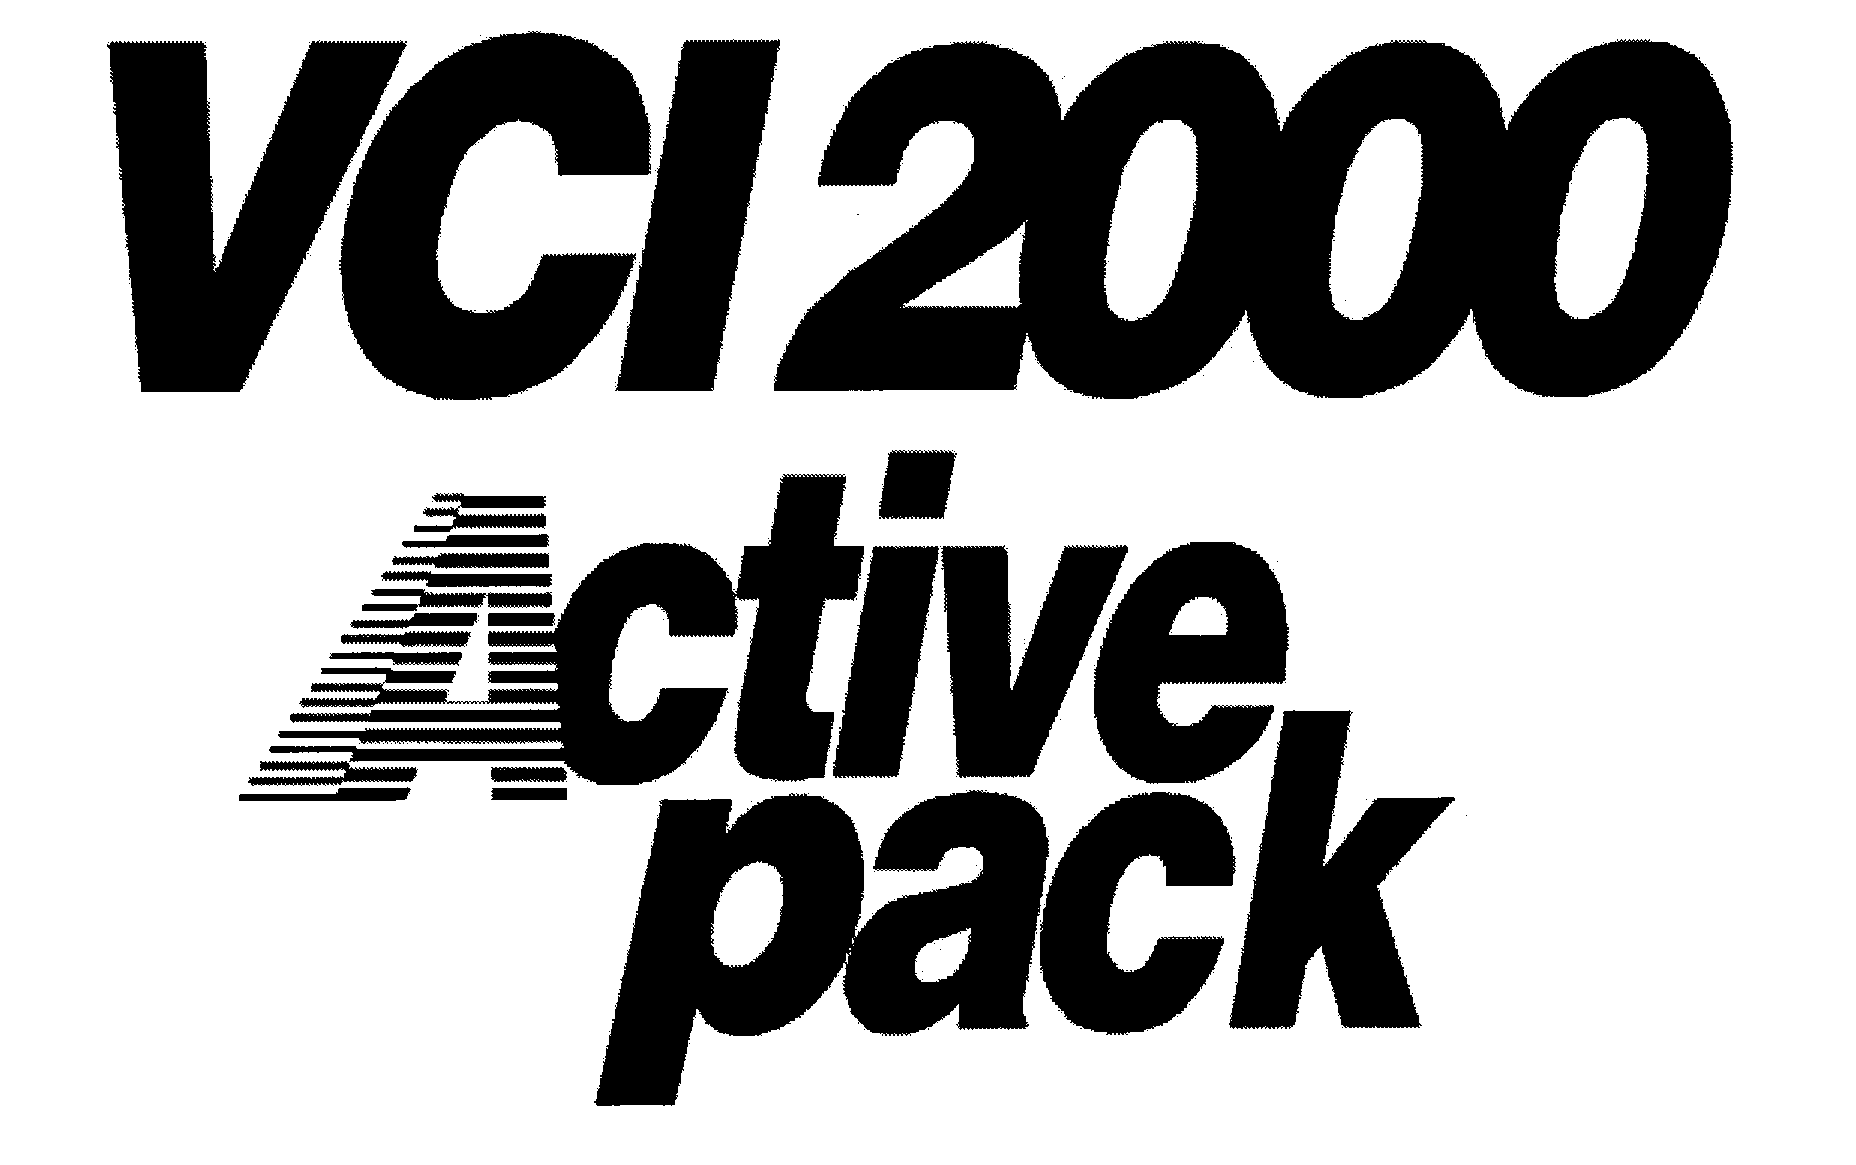  VCI 2000 ACTIVE PACK